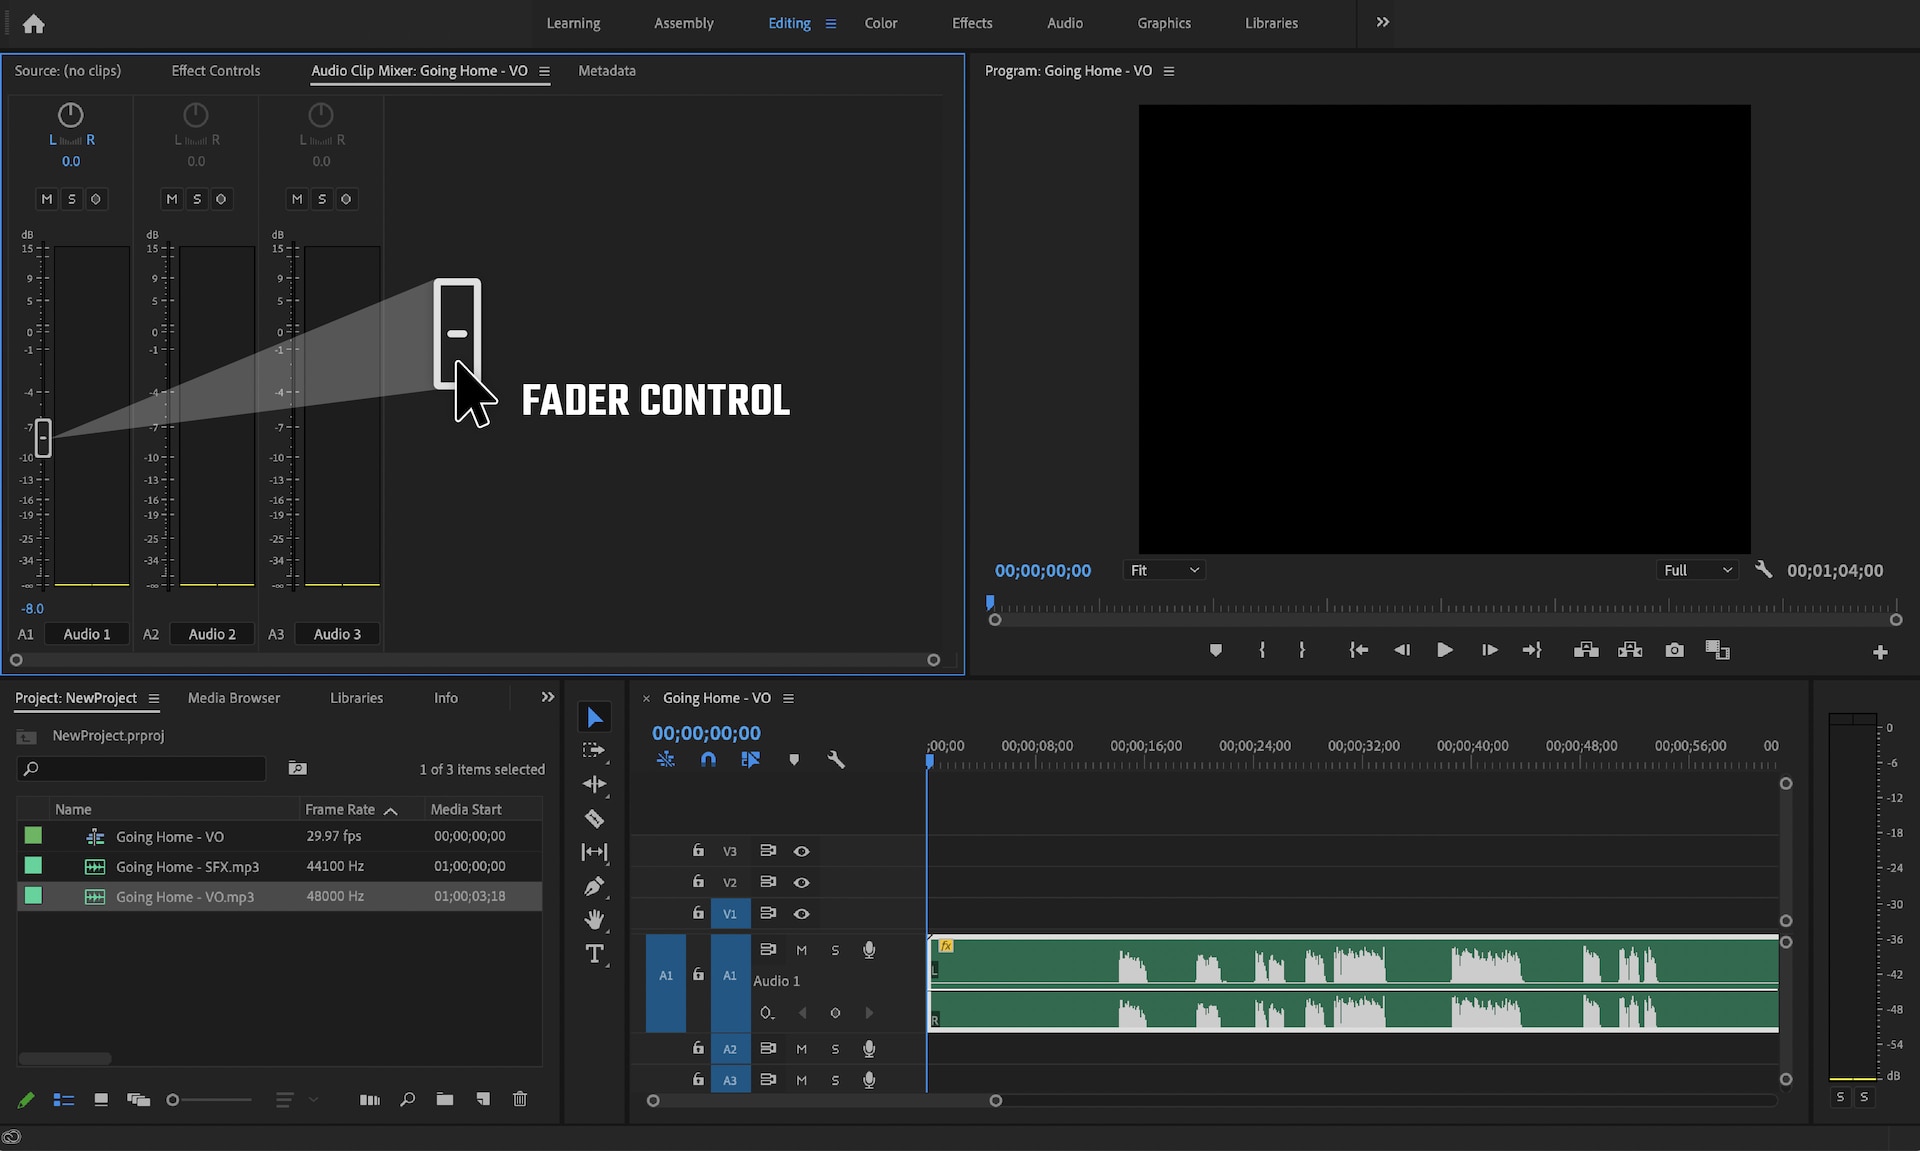 Screenshot of Adobe Premiere Pro with audio mix dialogue box open, fader control featured.